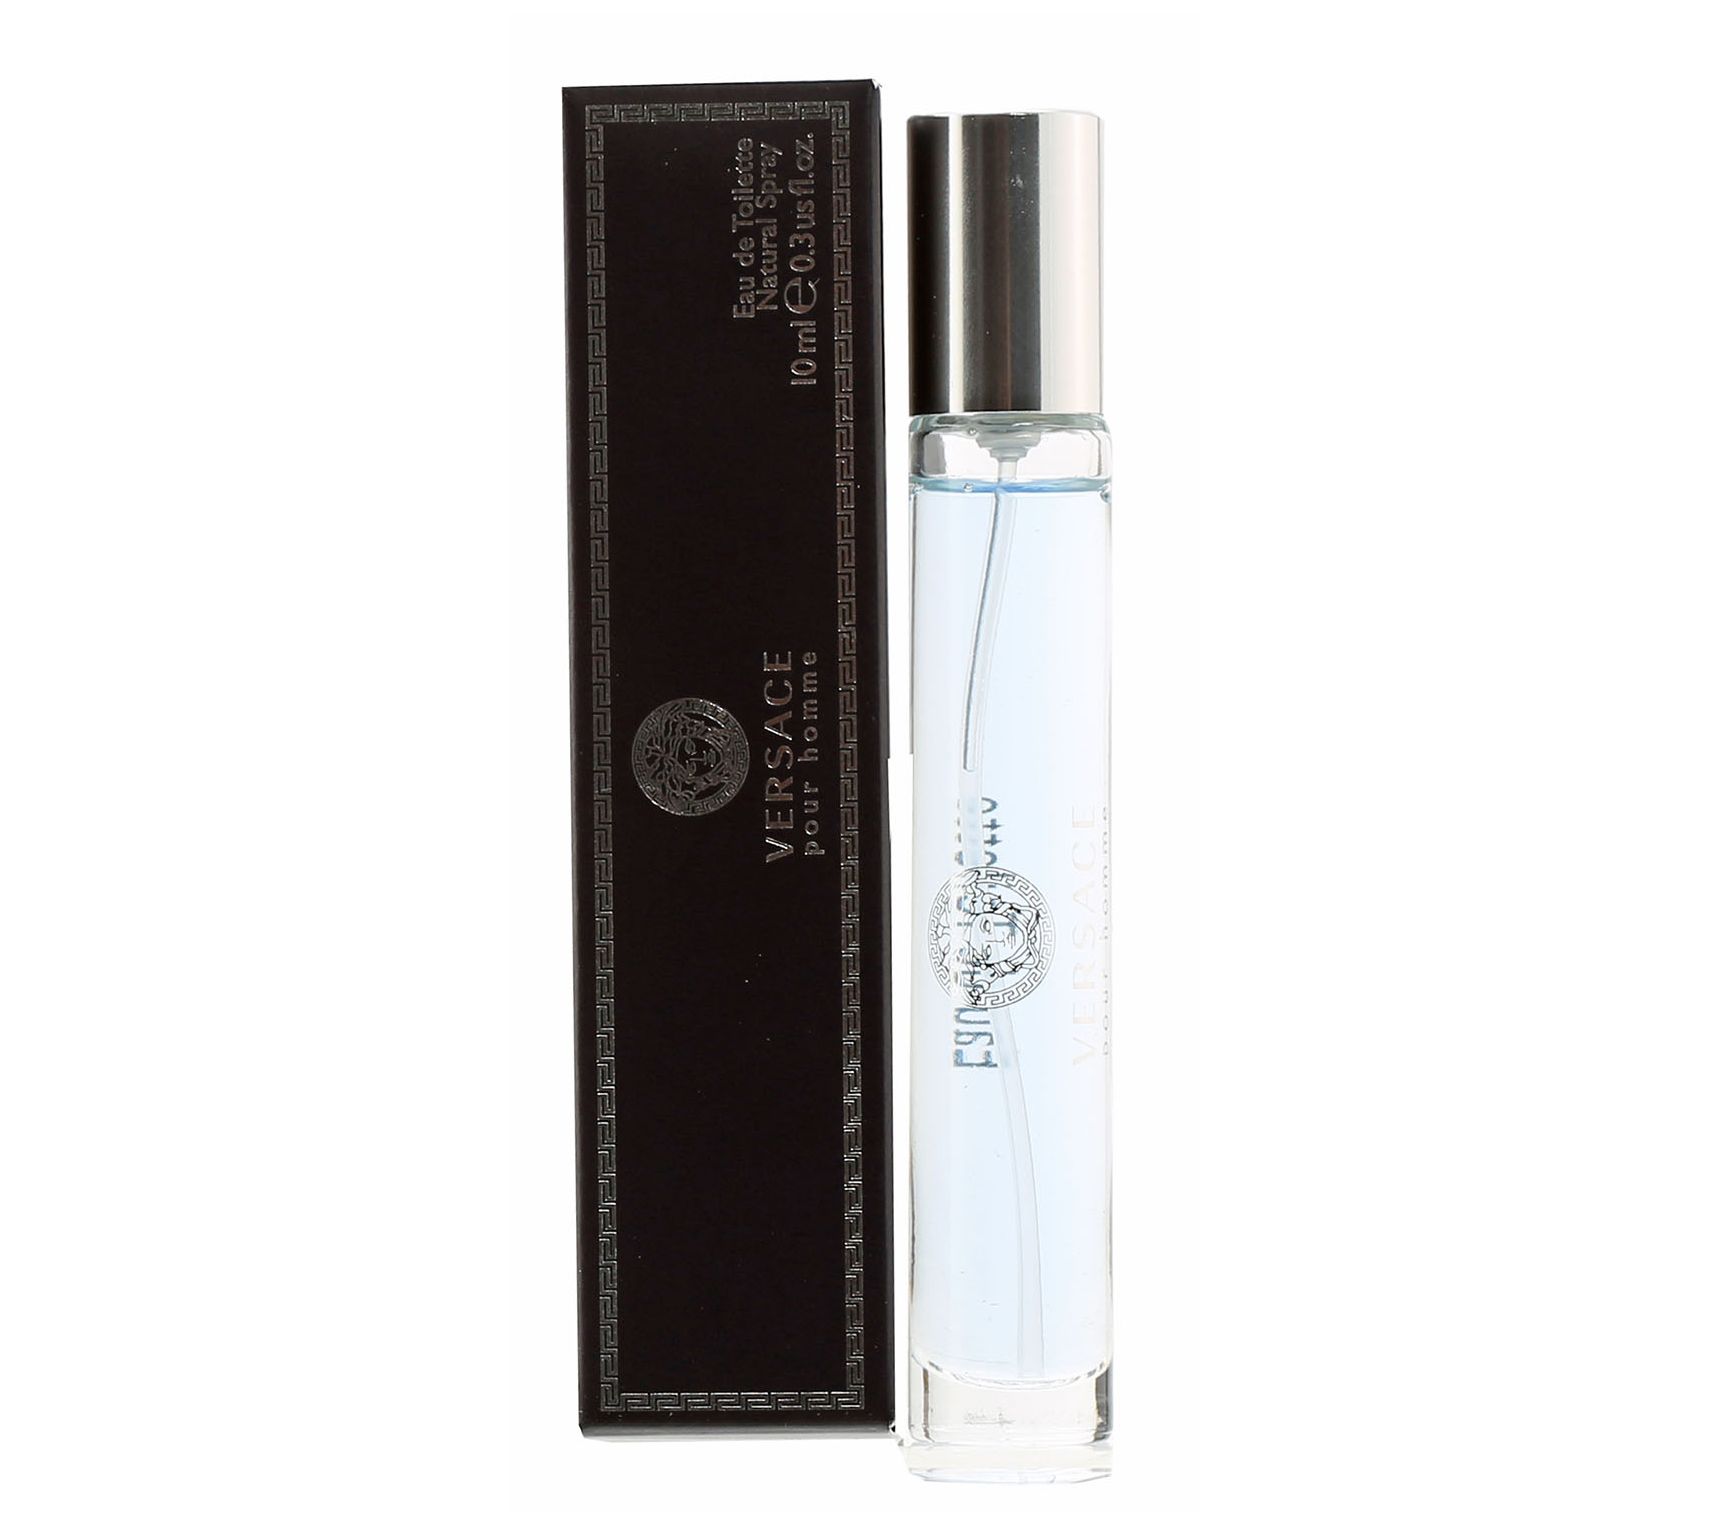 TESTER - Versace - Eros Homme - The King of Tester